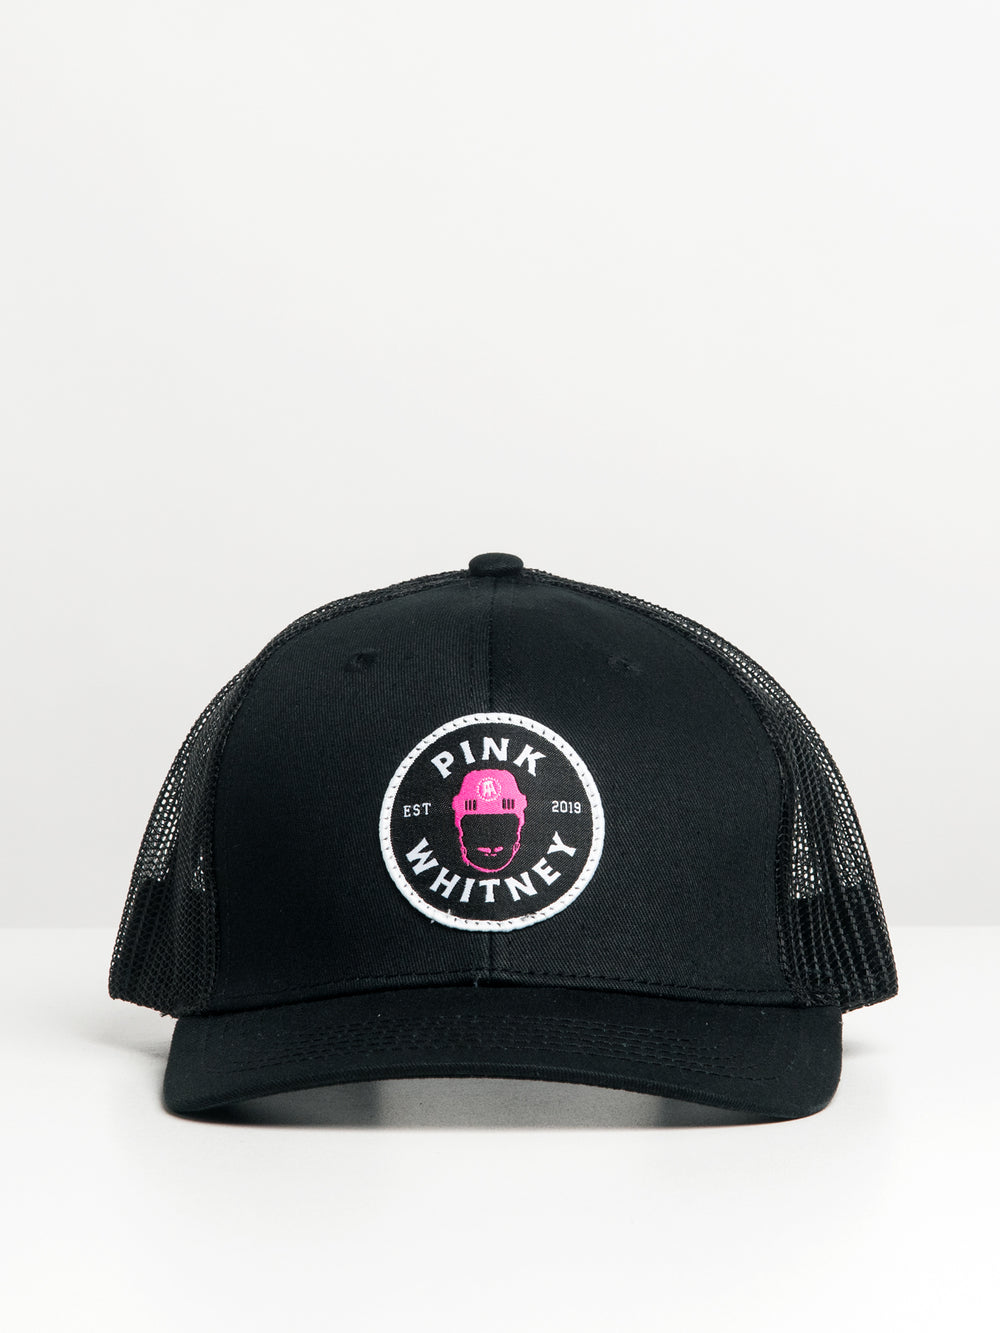 BARSTOOL SPORTS PINK WHITNEY PATCH TRUCKER HAT